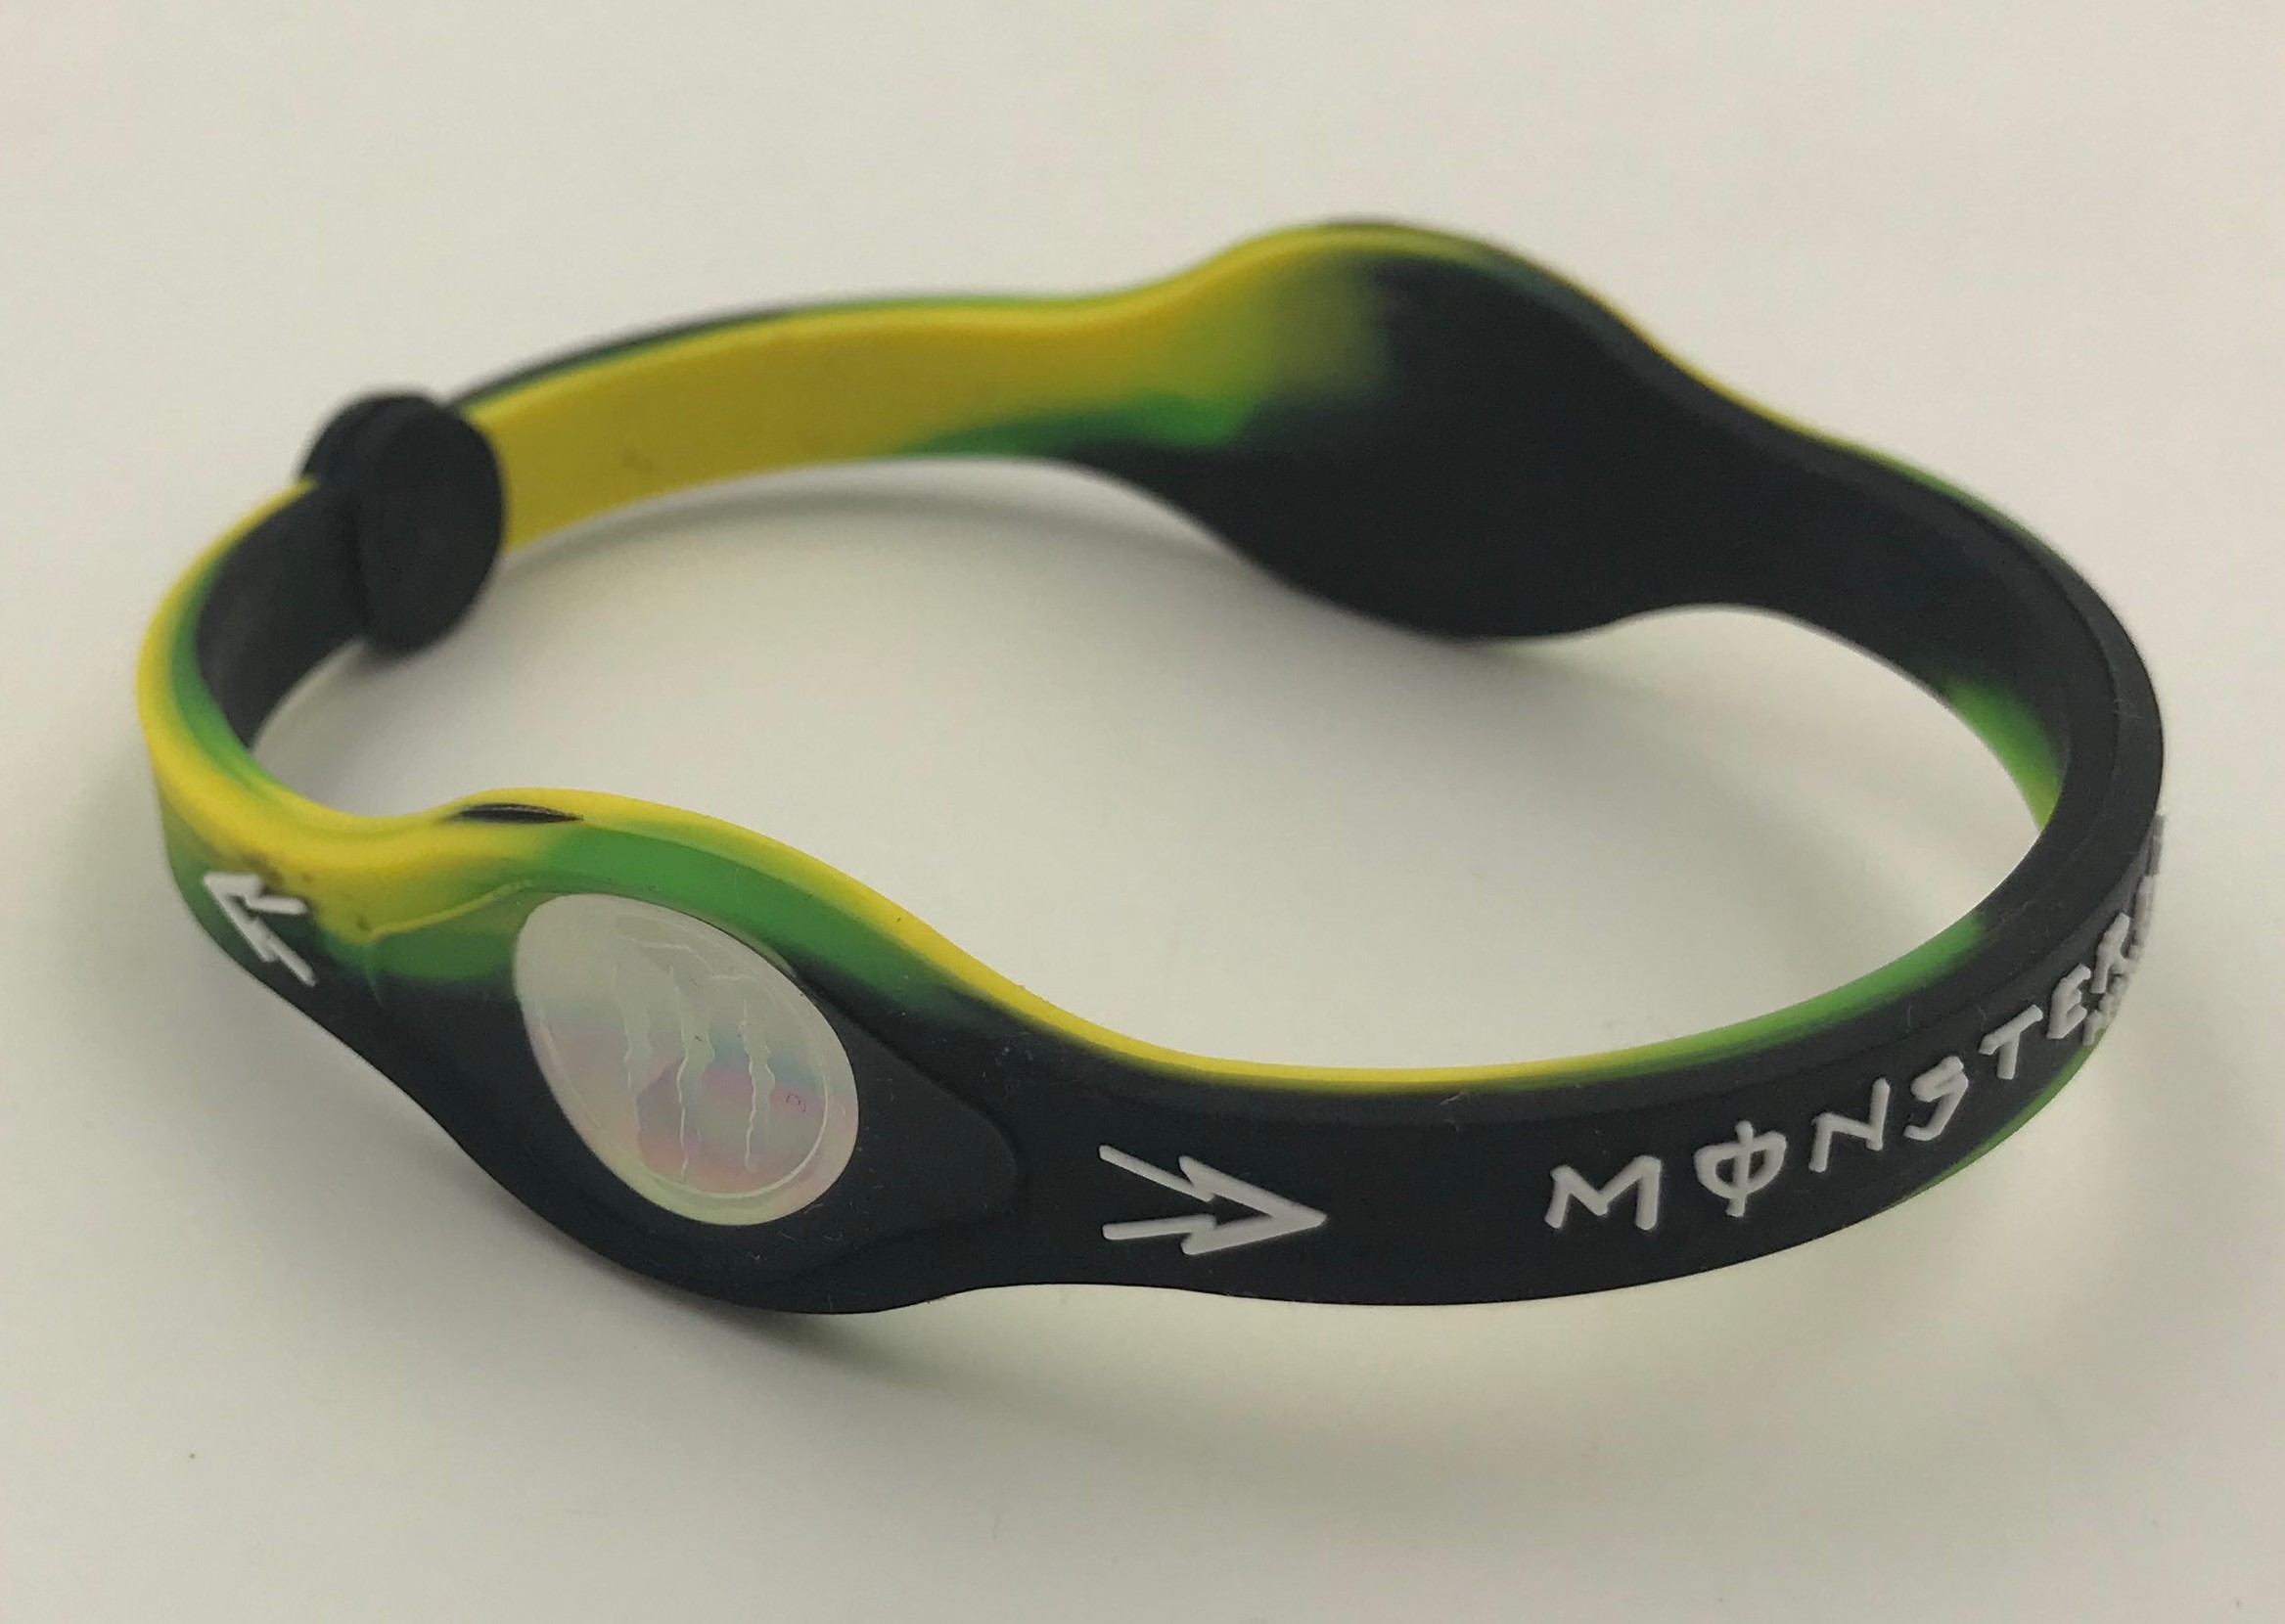 Power Balance admits it: No science behind wristbands – The Mercury News